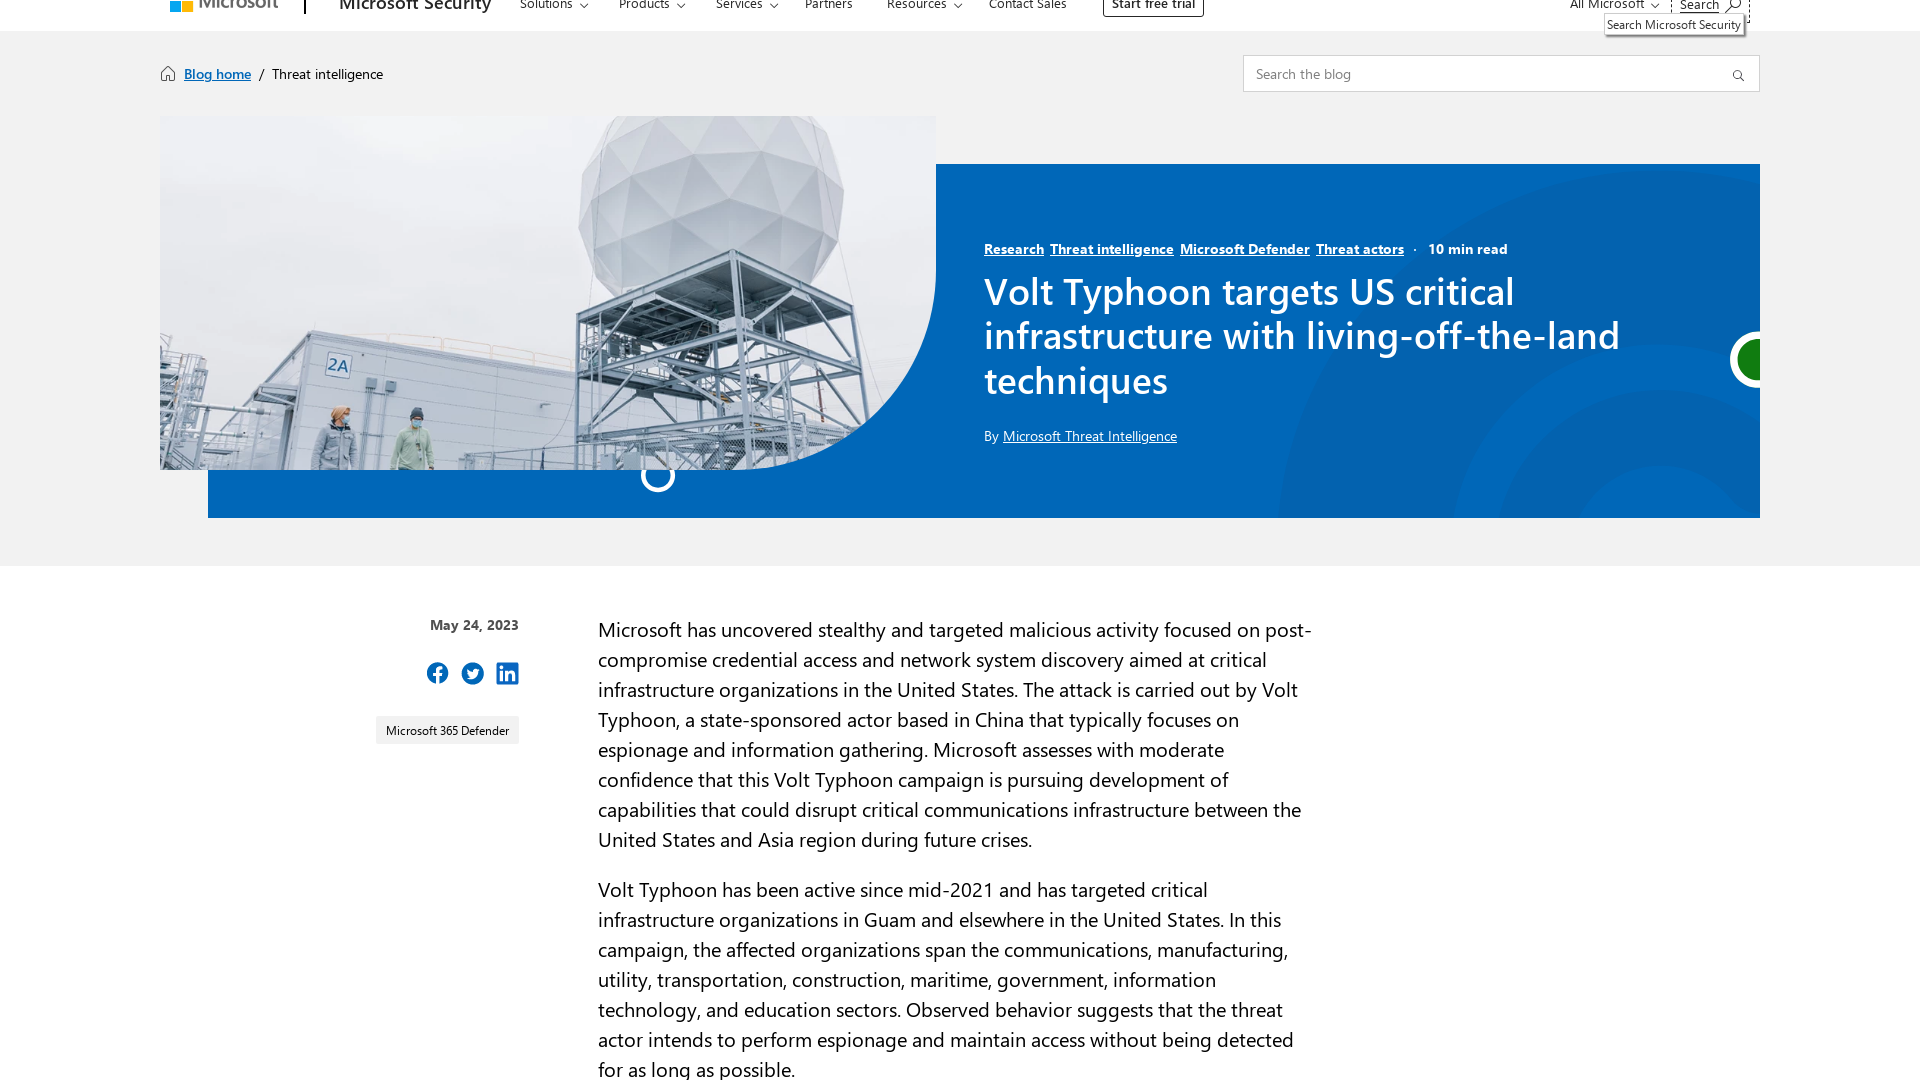 Volt Typhoon targets US critical infrastructure with living-off-the-land techniques | Microsoft Security Blog